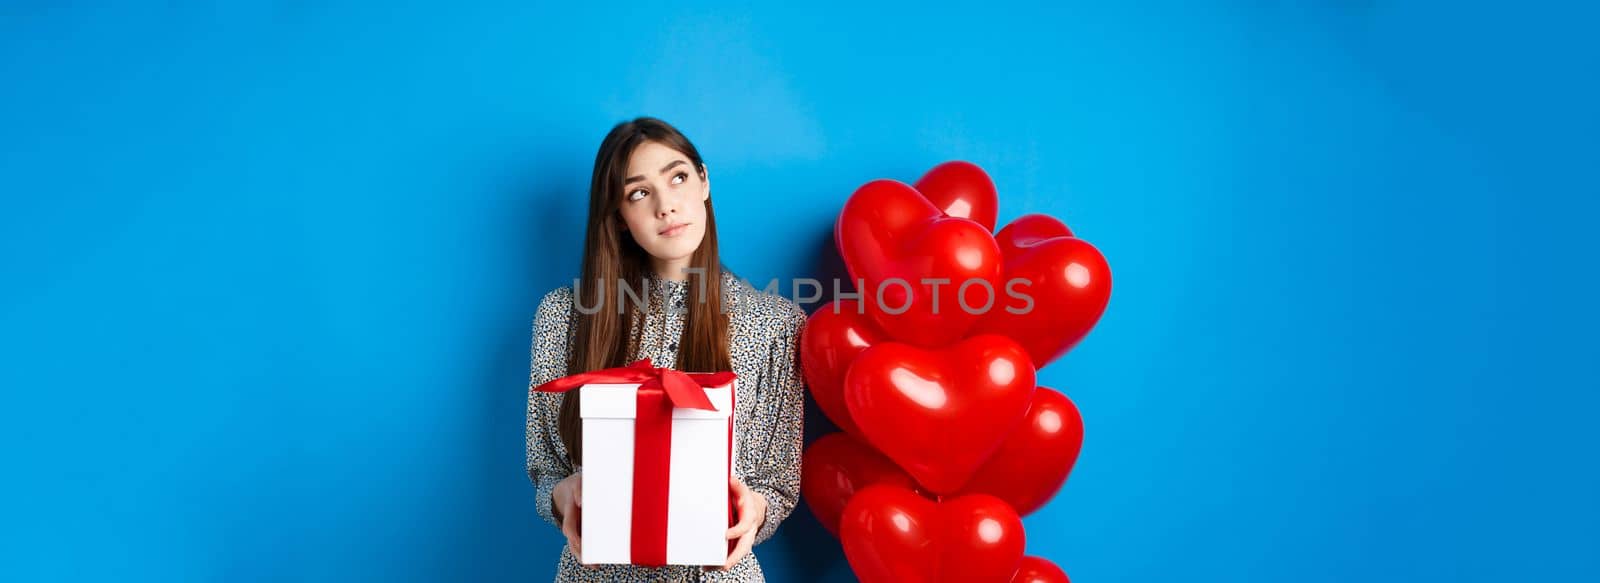 Valentines holiday concept. Pensive young woman in dress, holding gift and looking at upper left corner, thinking about lovers day, standing near red hearts balloons, blue background by Benzoix